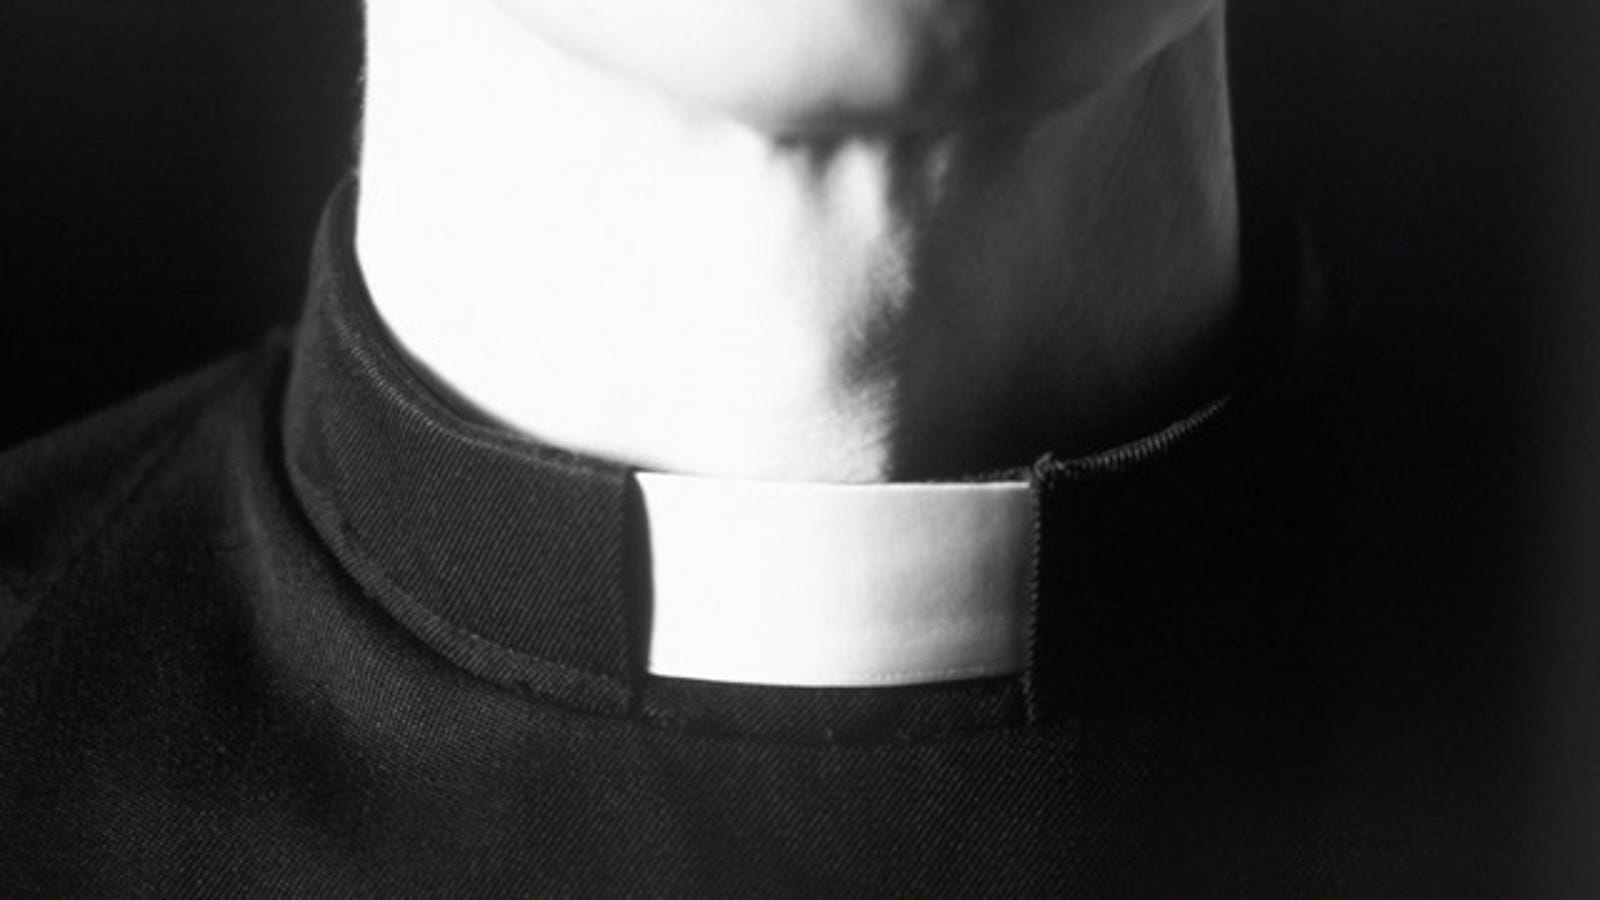 Thanks to Catholic Church, 200 Suspected Child Molesters Are Roaming Free